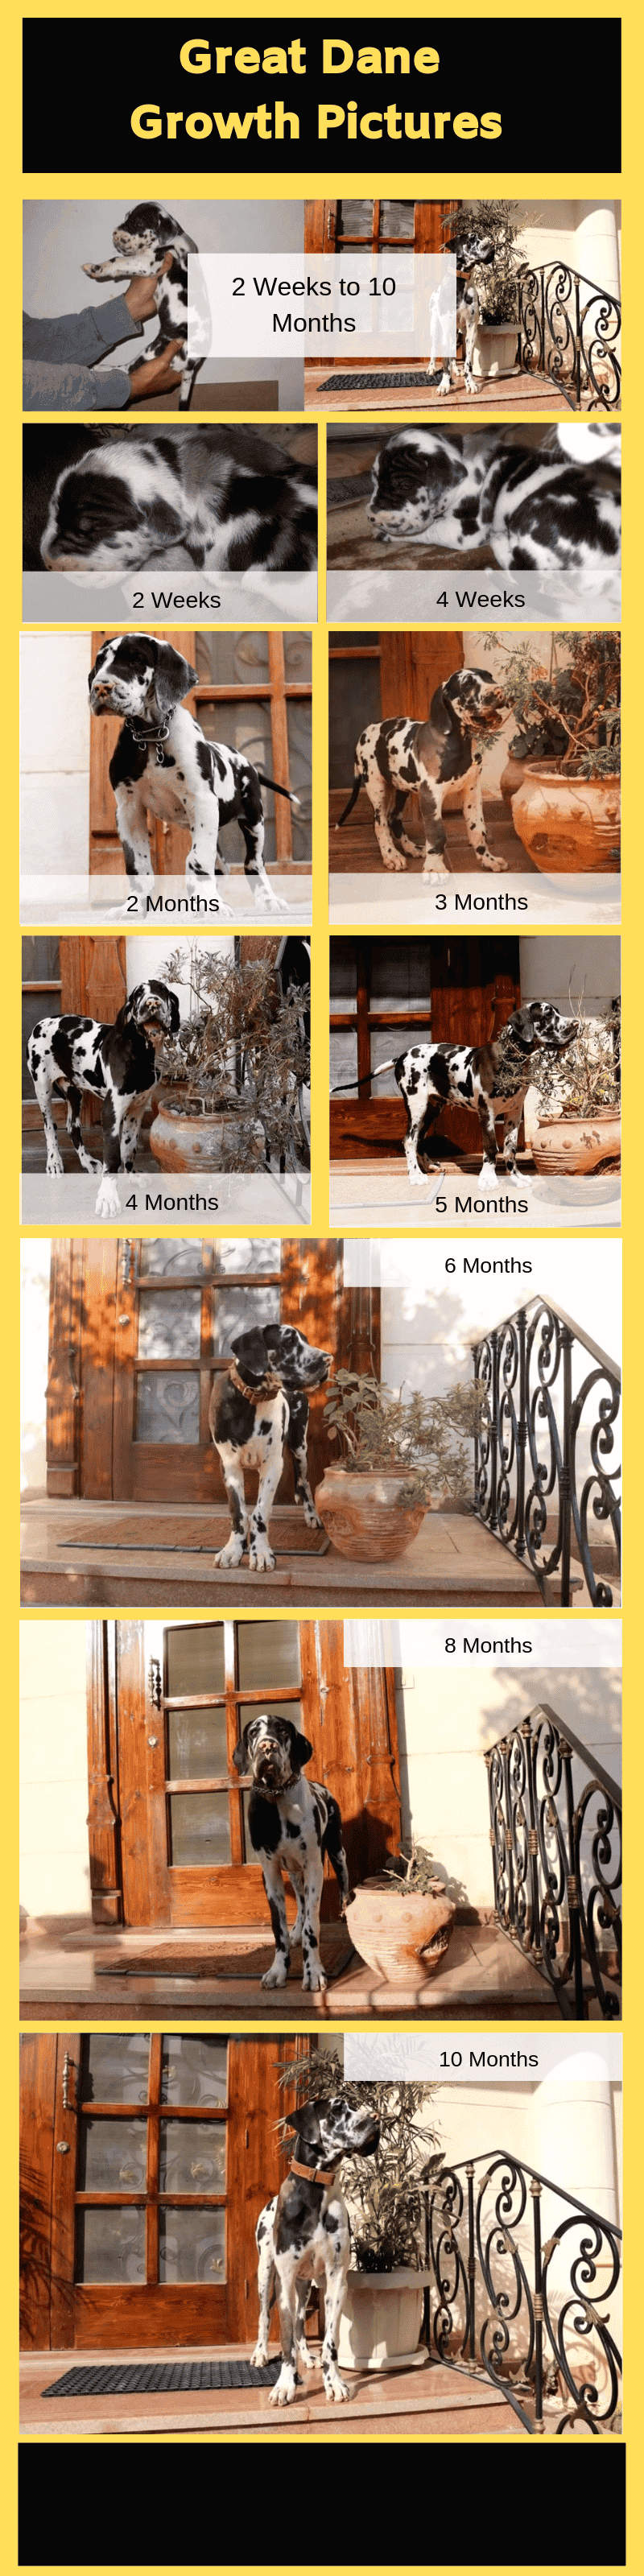 Great-Dane-Growth-Pictures